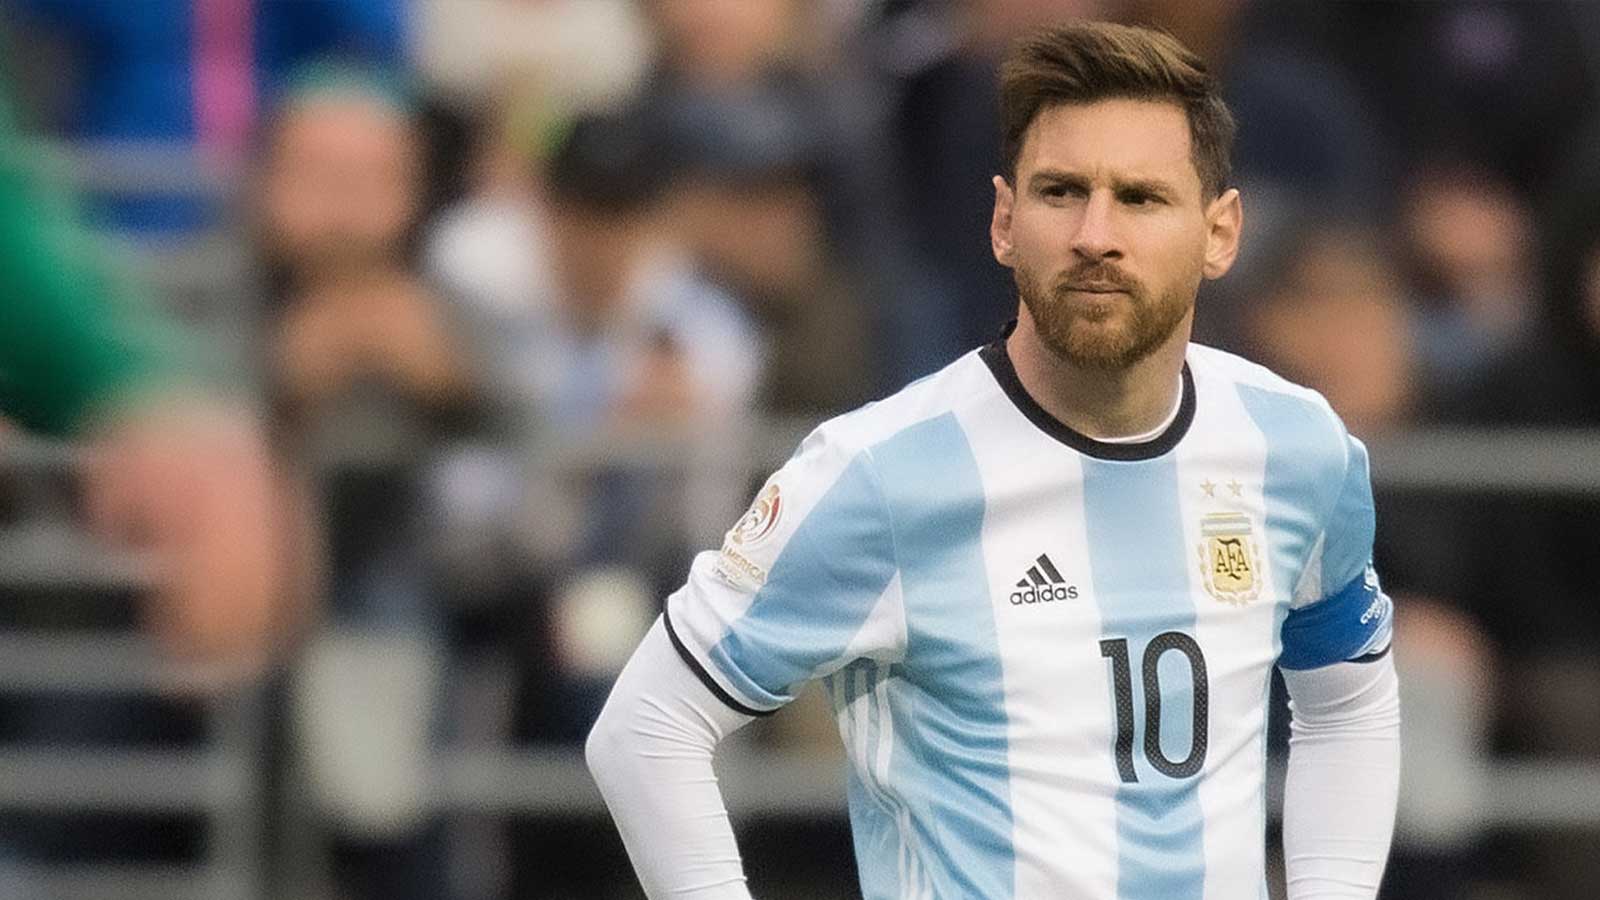 The Imperative Question Does Lionel Messi Really Have Autism